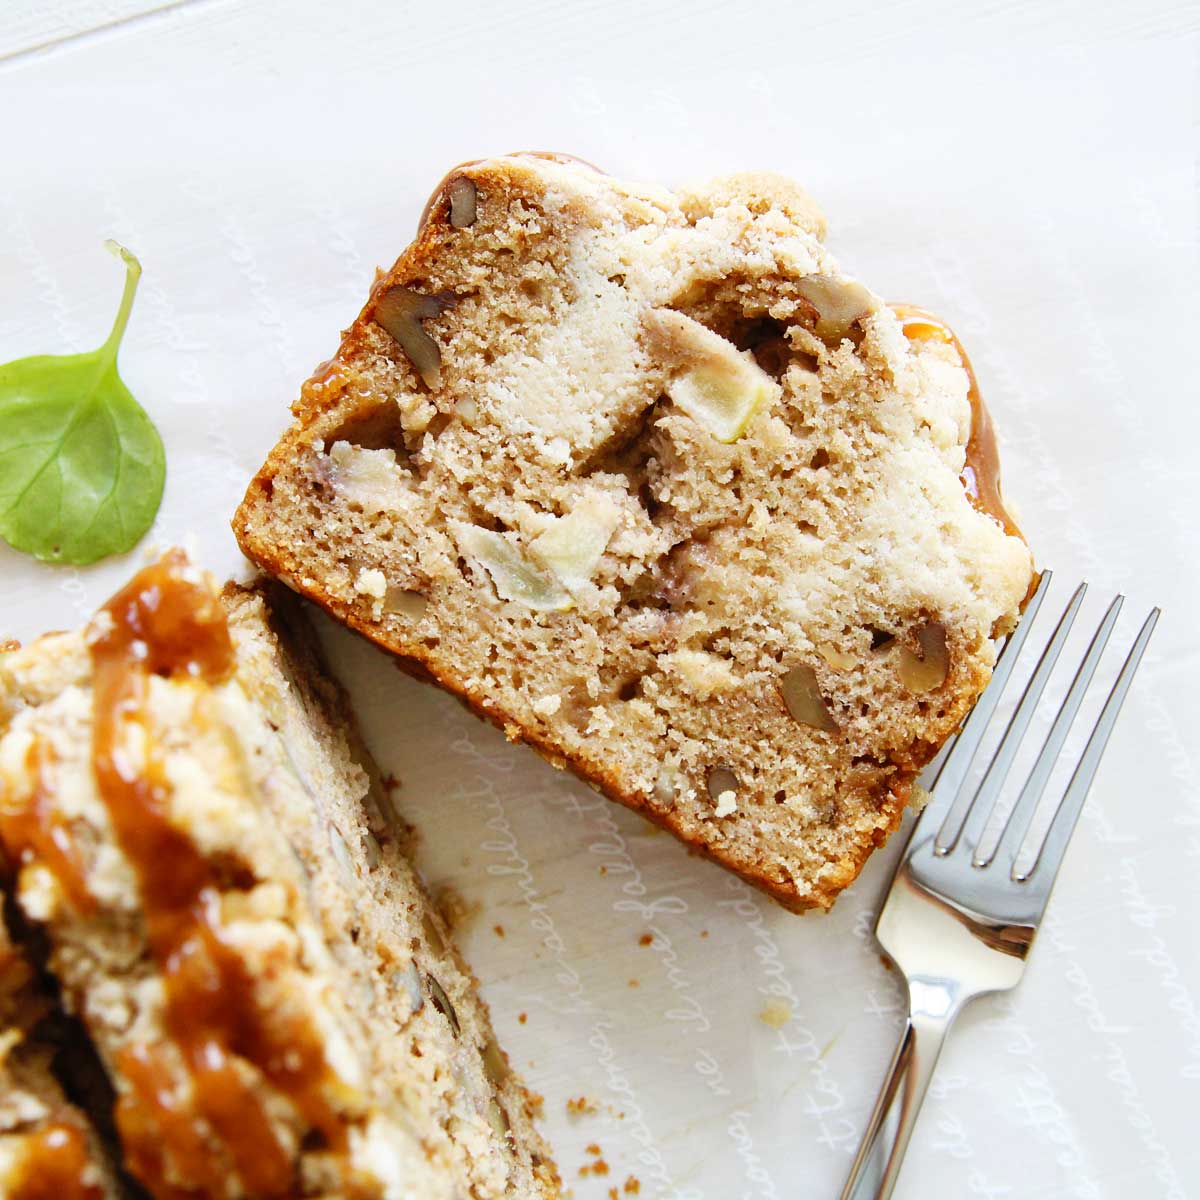 The Most Comforting Applesauce Banana Bread with Streusel Topping - Flourless Vanilla Swiss Roll Cake